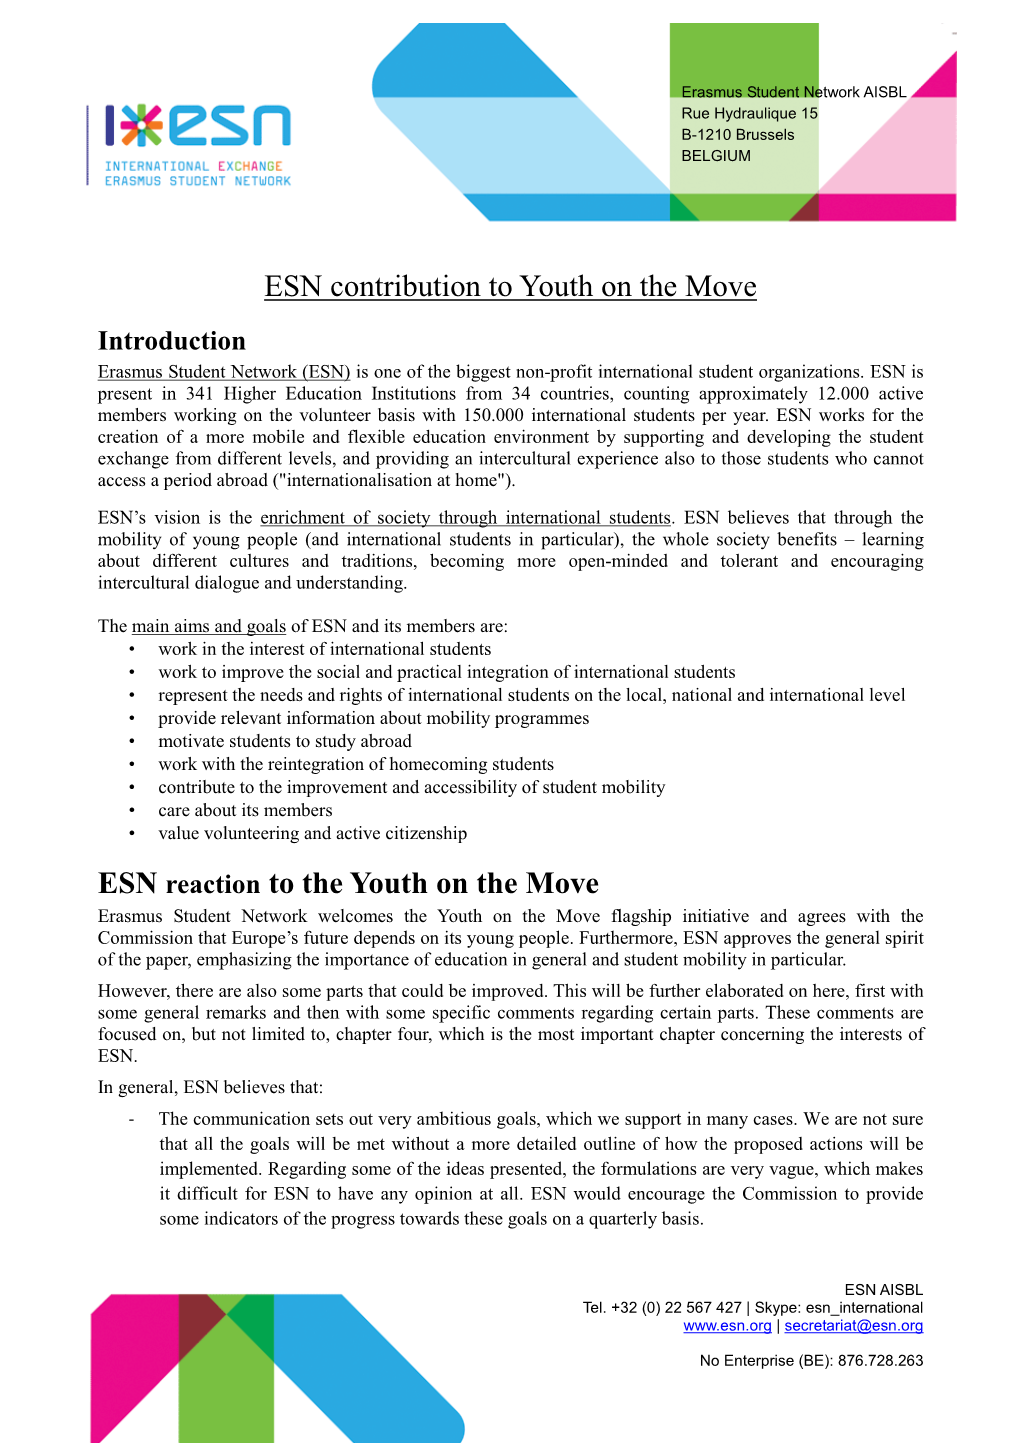 ESN Reaction to Youth on the Move